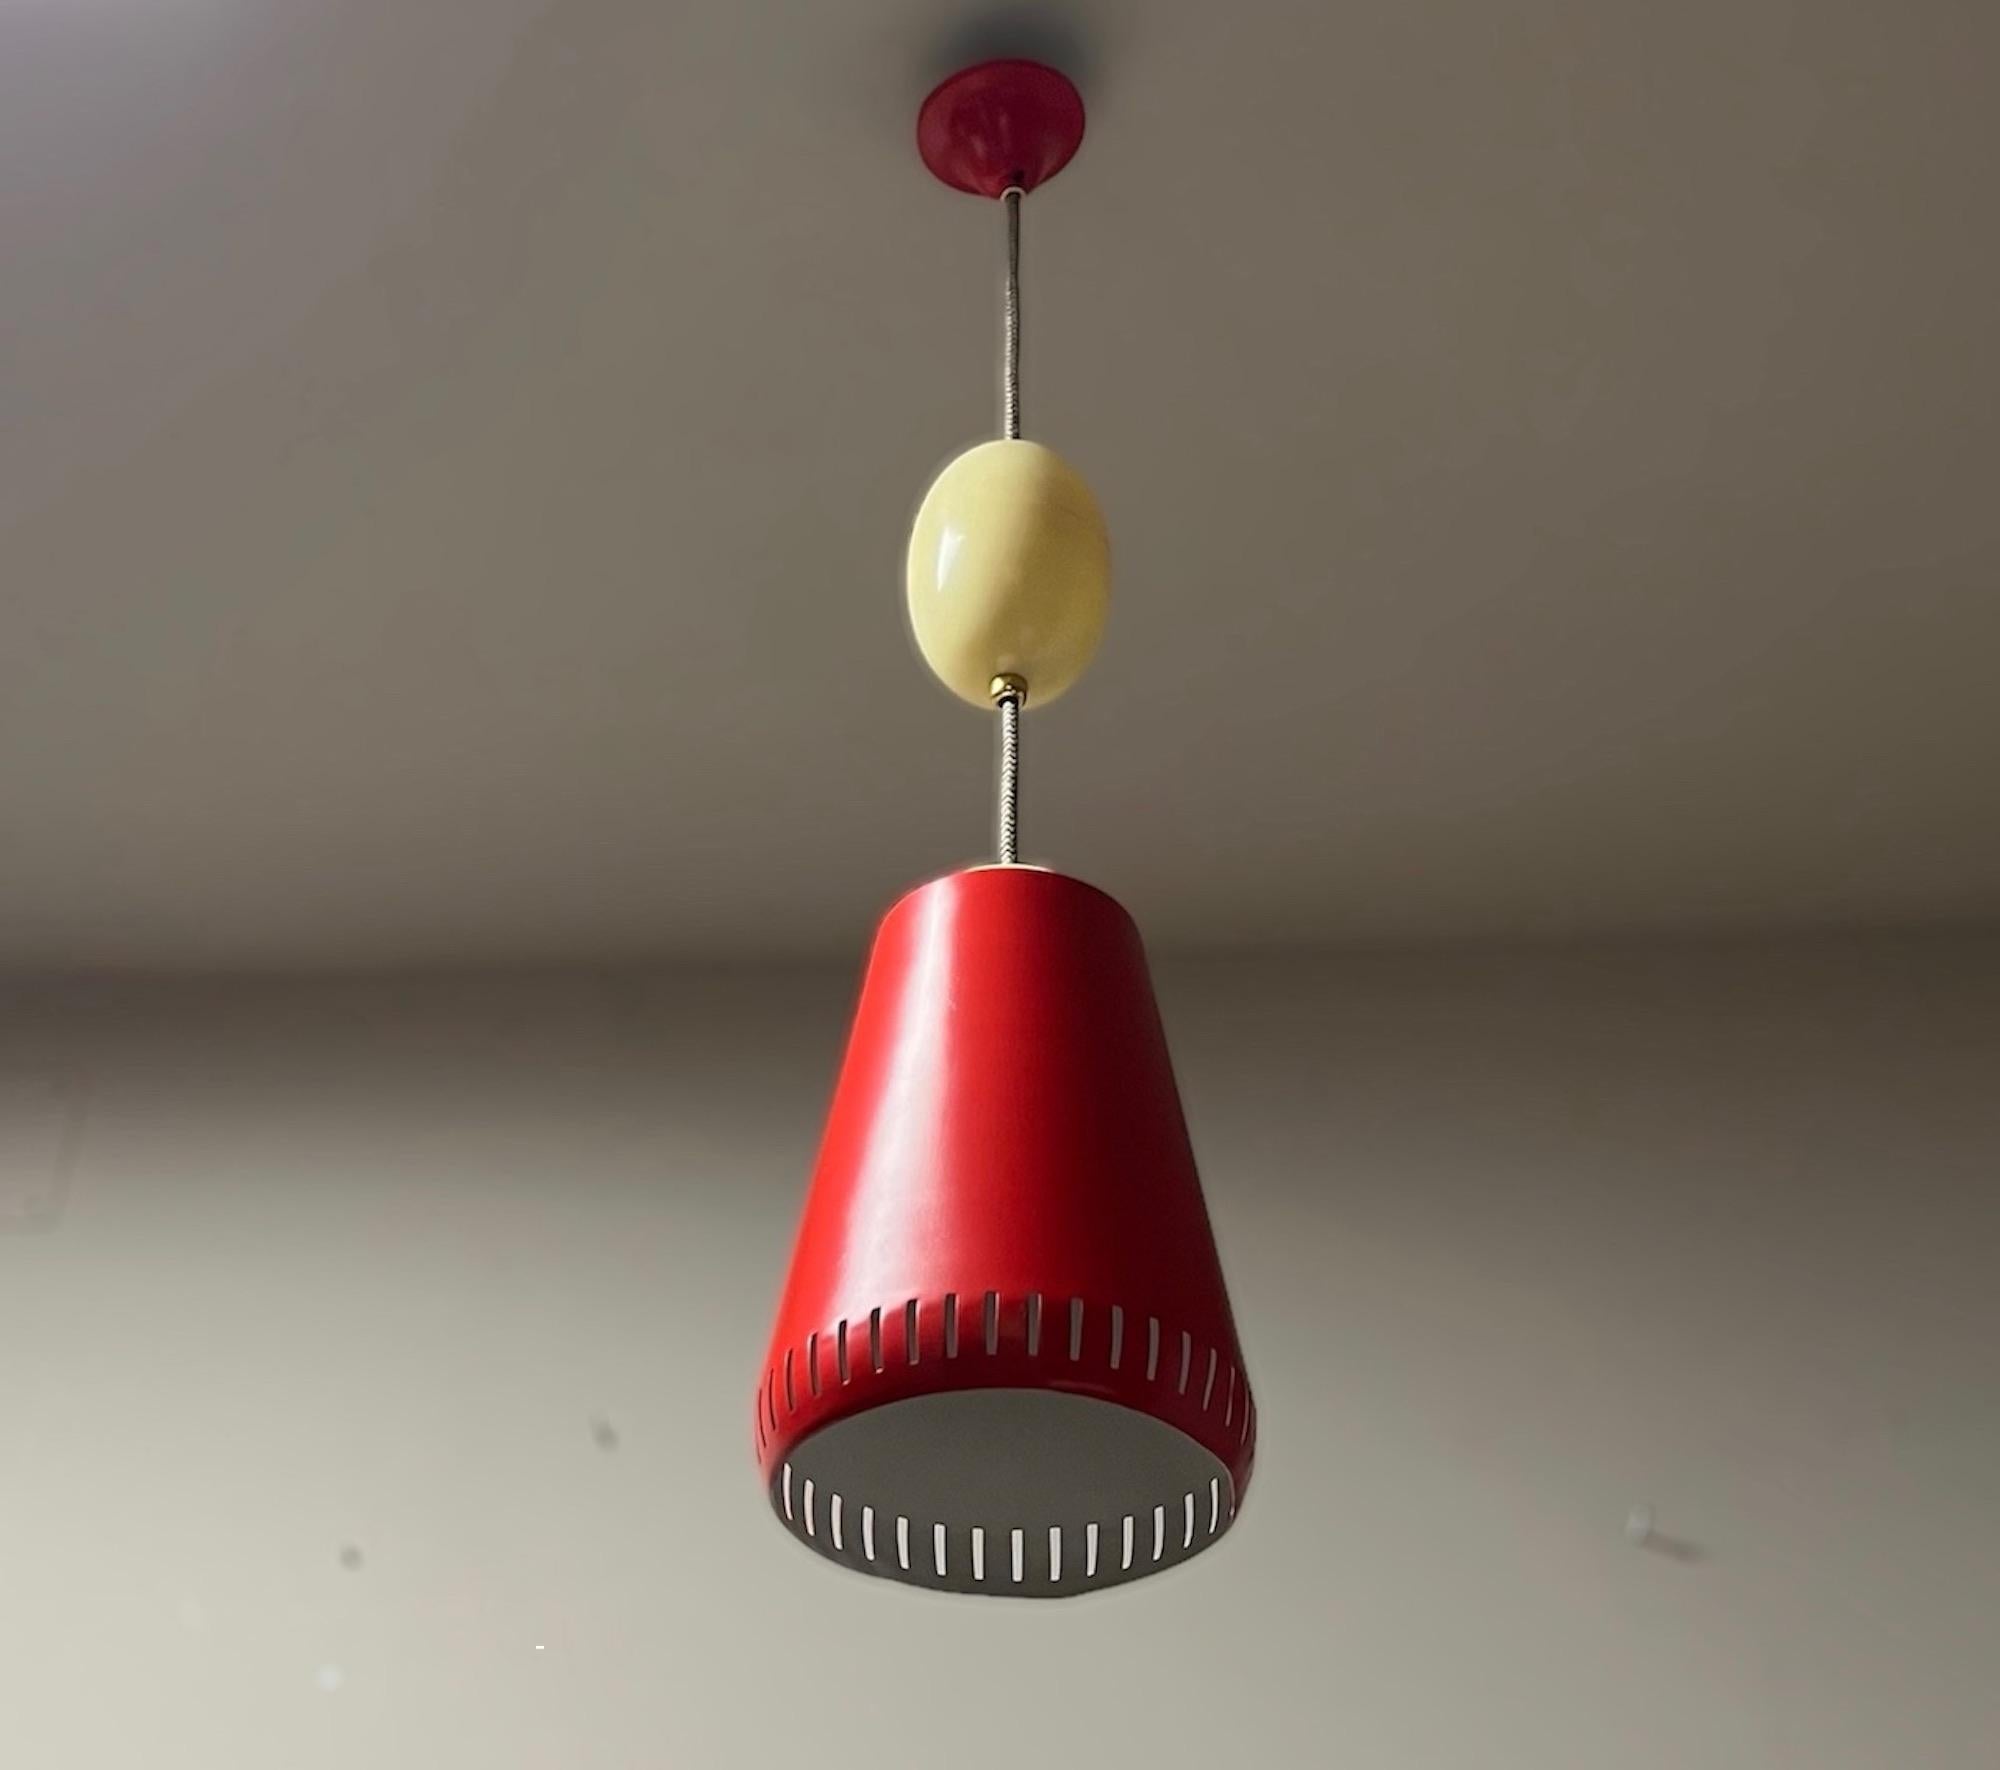 A lovely hanging lamp by Stilnovo, with all the charm of the 1960s. The orange lampshade made of metal with the distinctive Stilnovo rectangular holes matches perfectly with the beige plastic parts.It has an original switch on the top of the